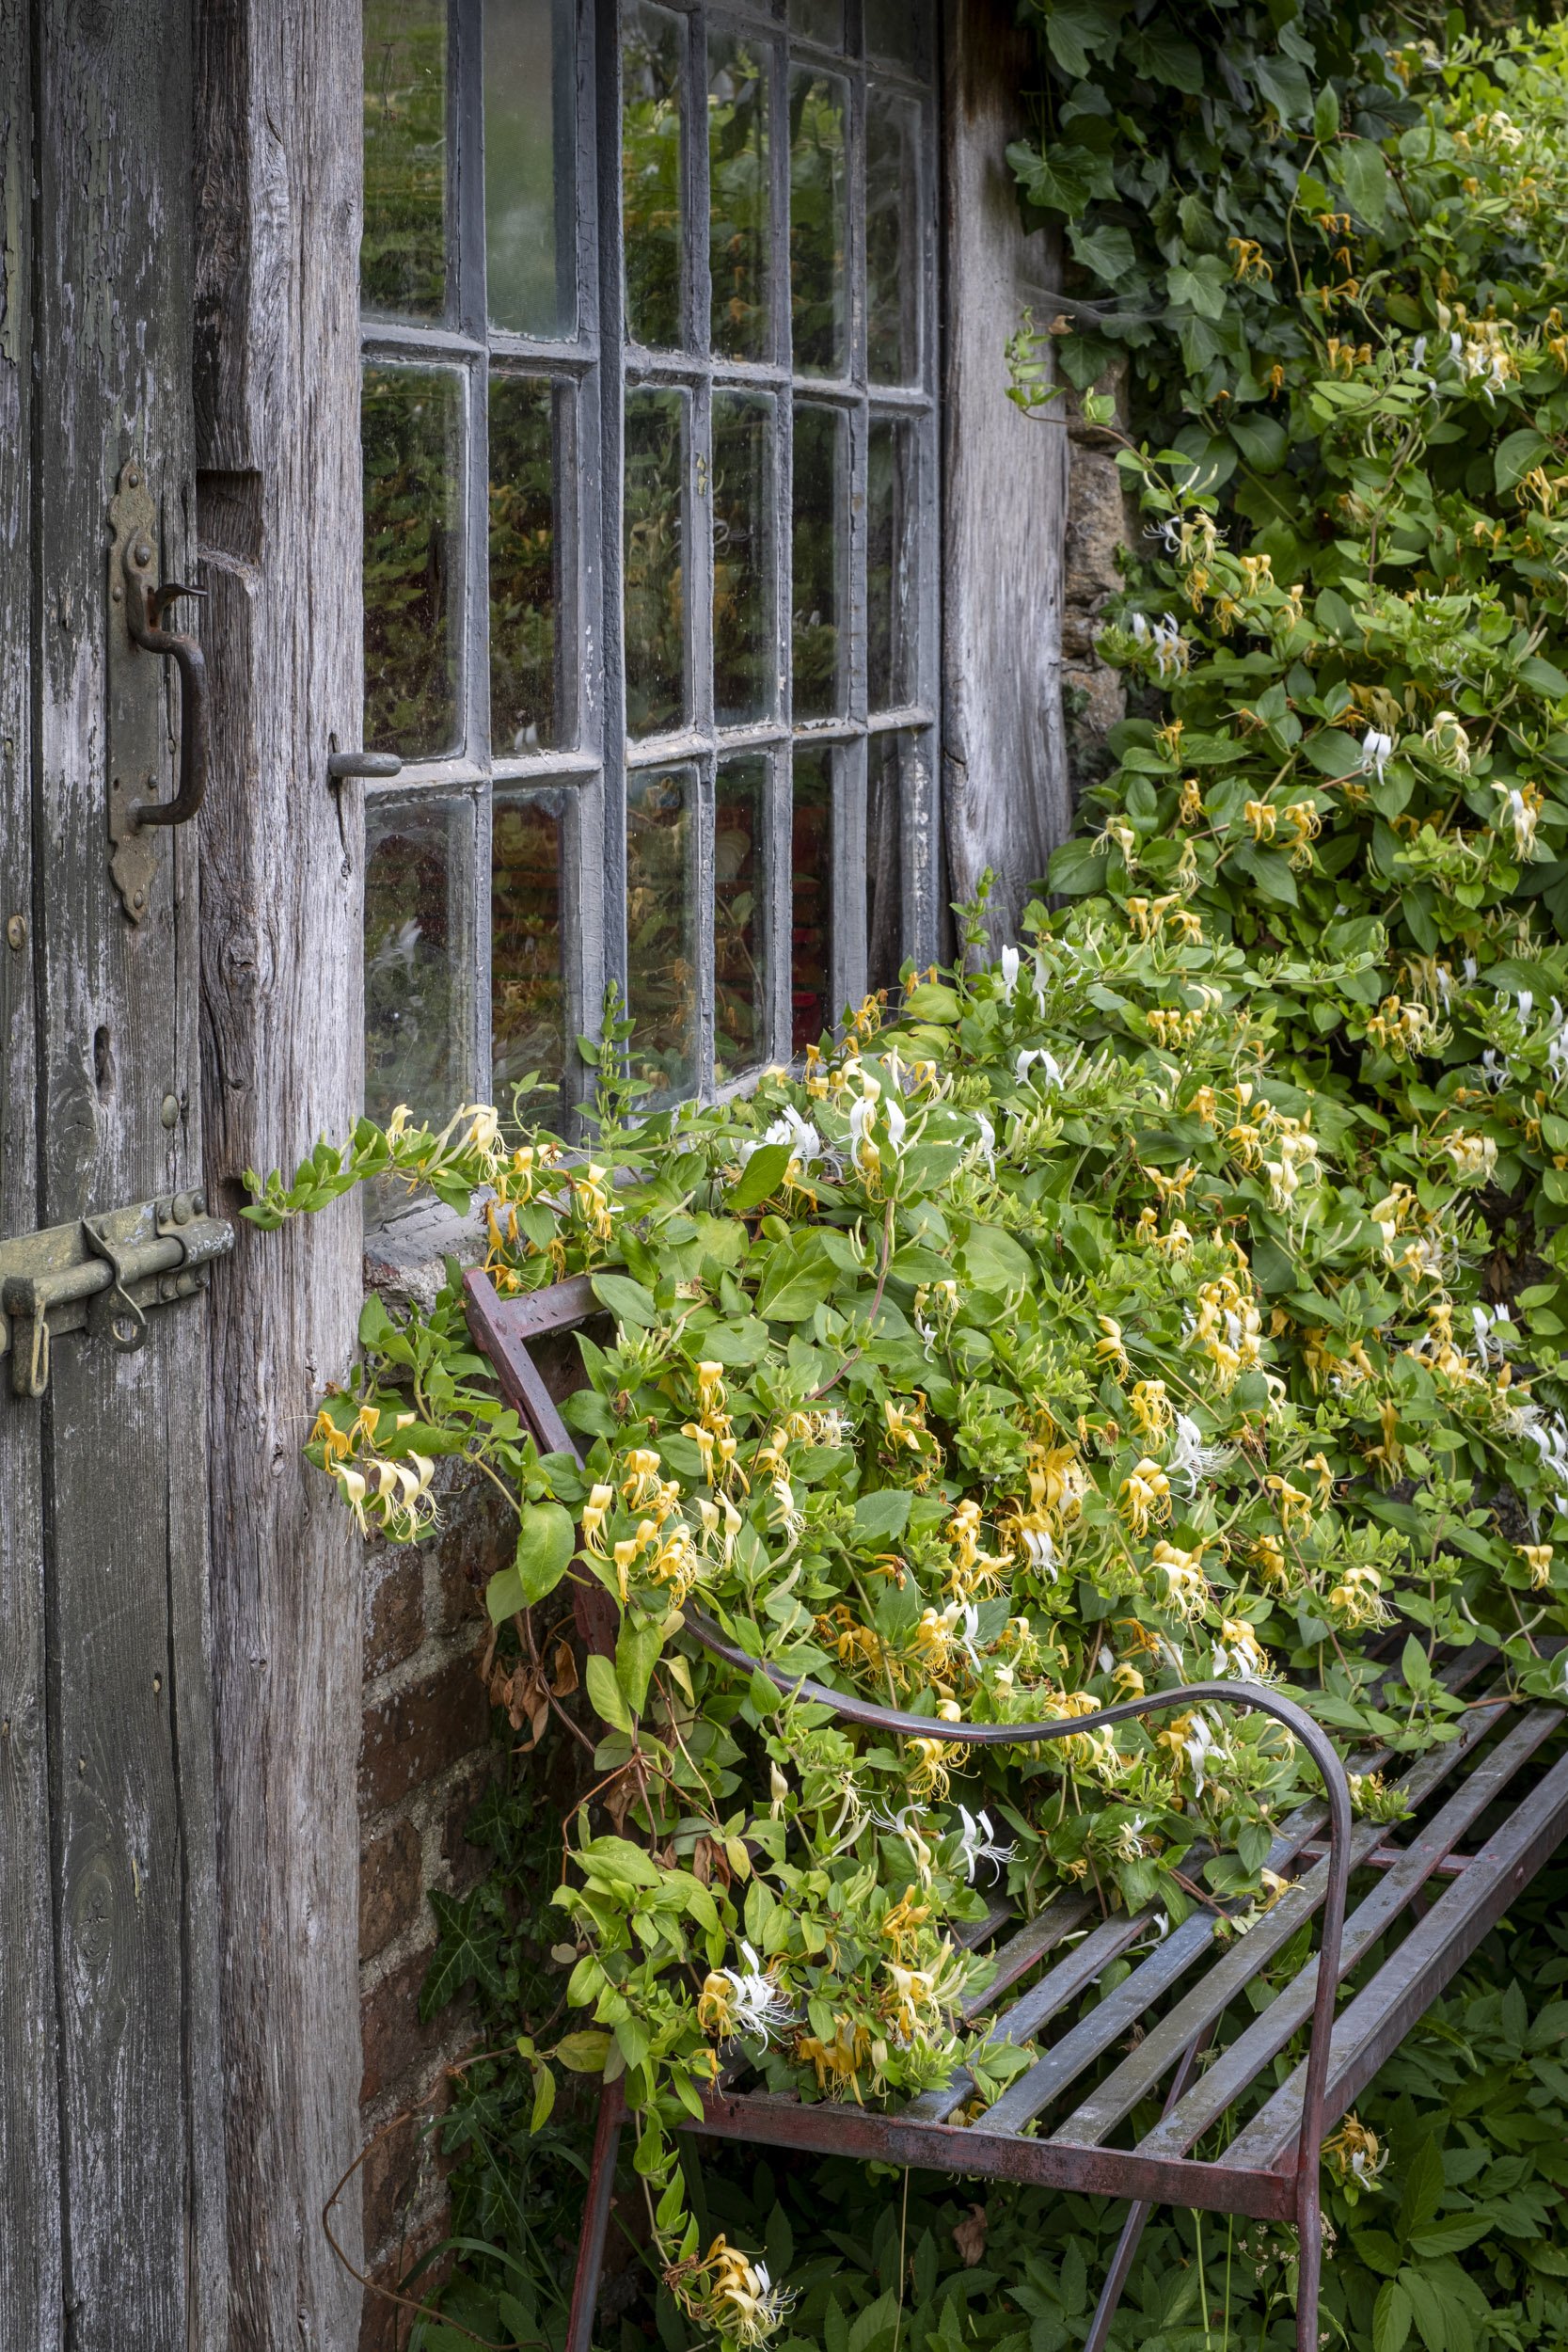 Honeysuckle growing over a bench in a cottage garden